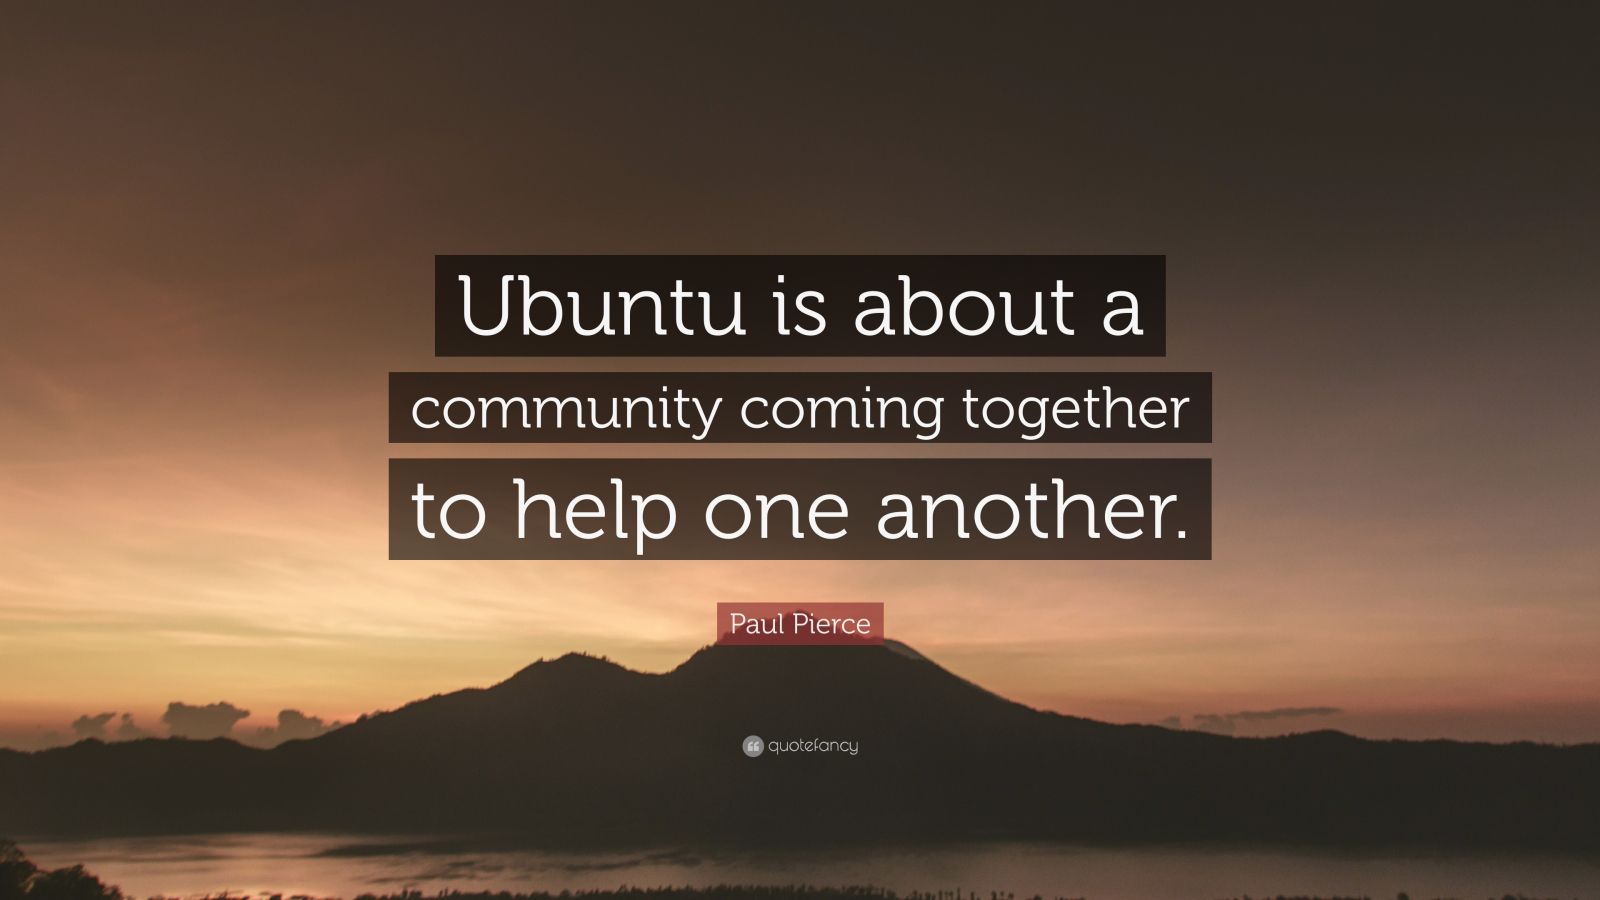 Paul Pierce Quote: “Ubuntu is about a community coming together to help ...